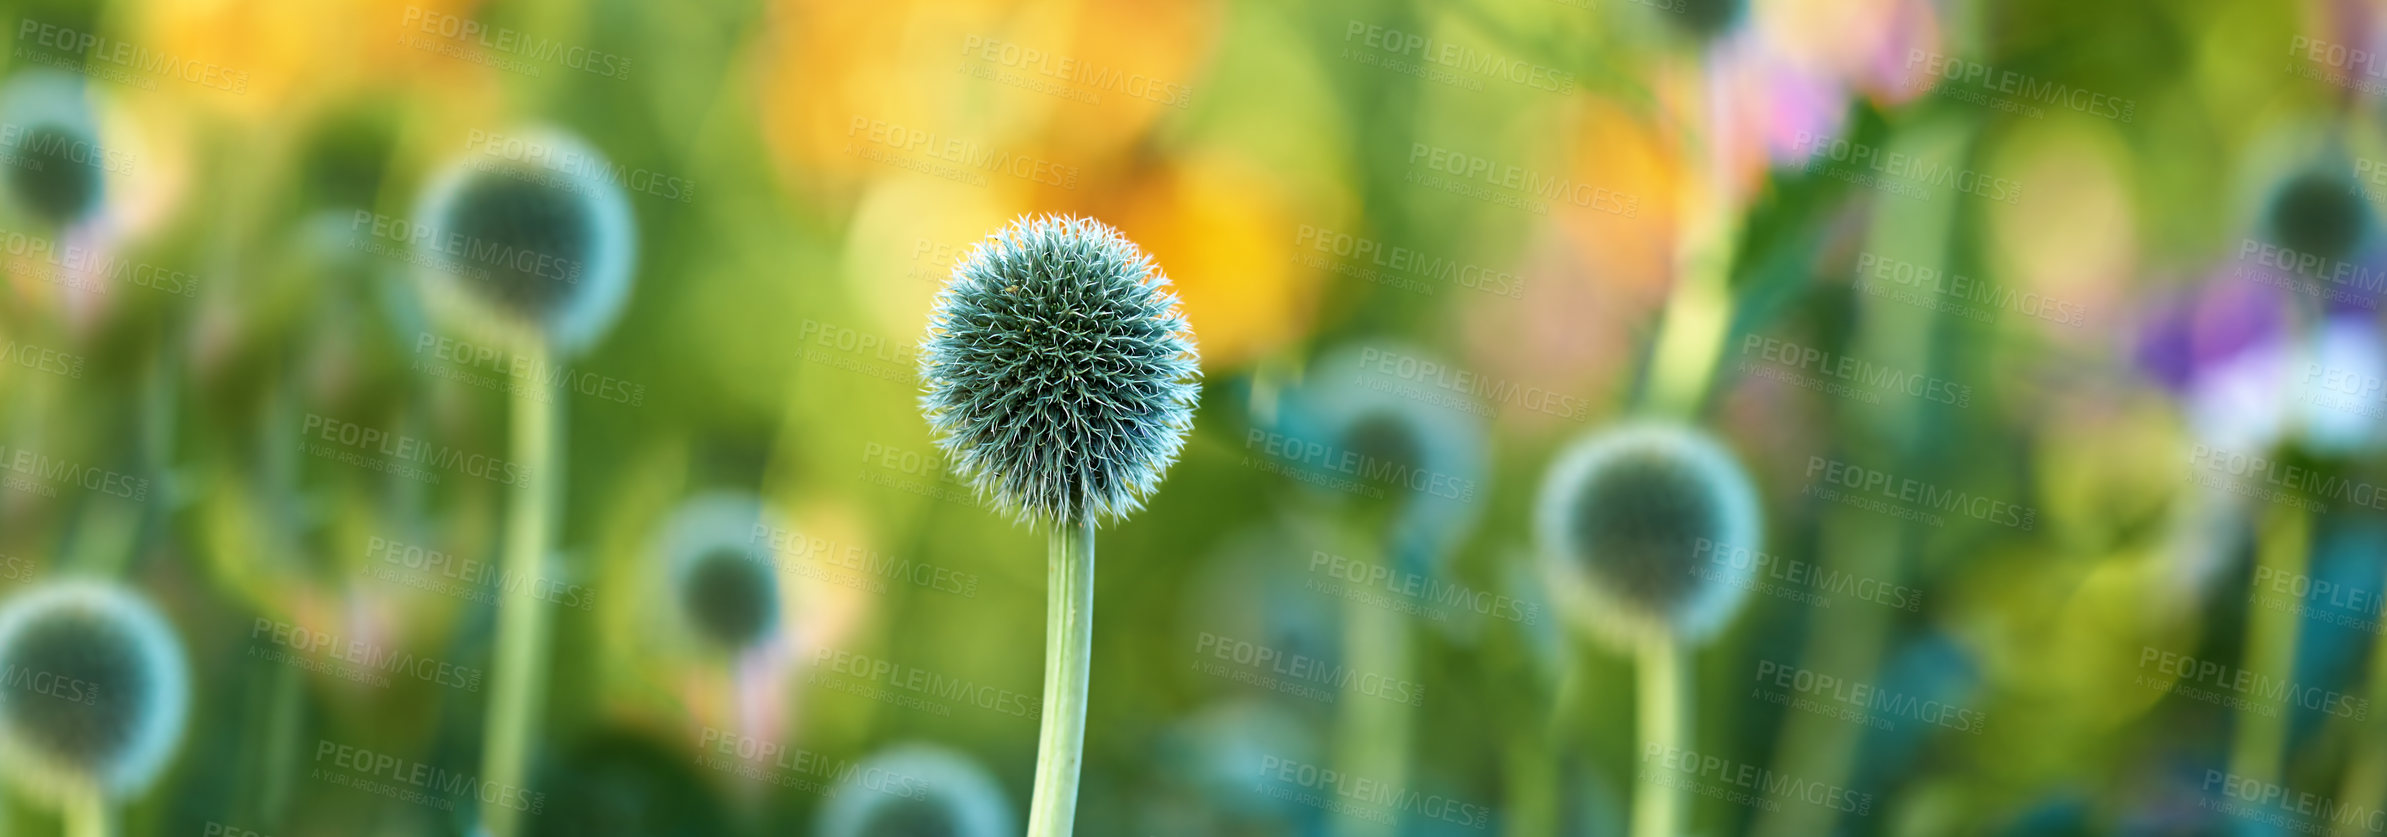 Buy stock photo Globe thistle, nature and flower in garden for spring closeup, fresh and natural wild vegetation. Ecology and pollen plant for biodiversity or environmental sustainability in conservation growth

